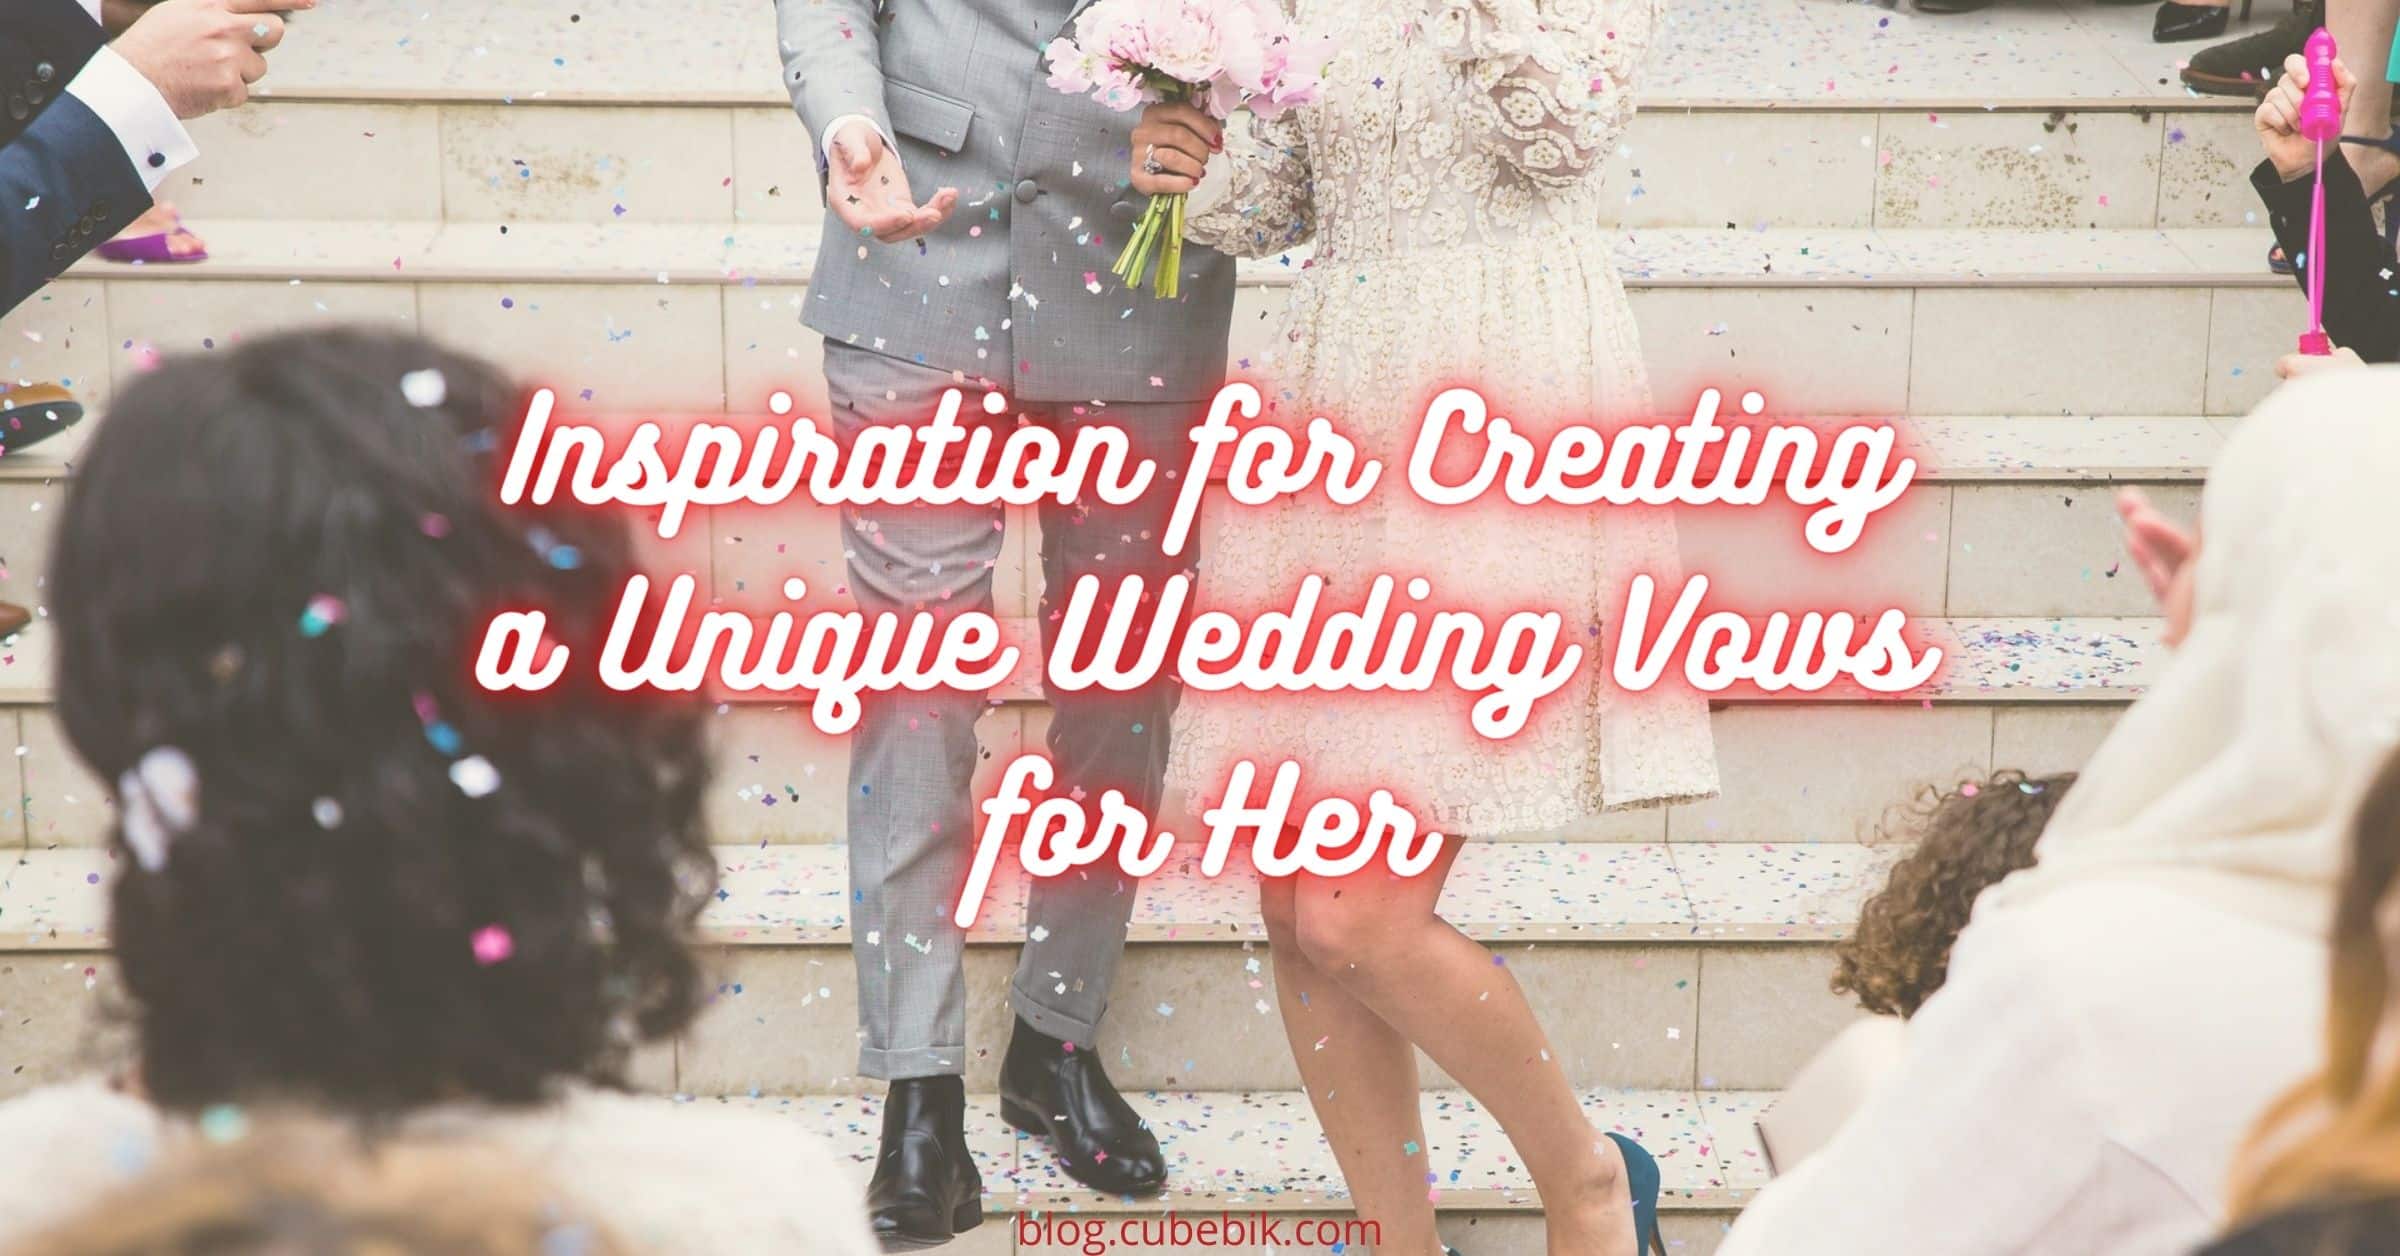 Wedding Vows For Her _ Inspiration For Creating A Beautiful Expression Of Love